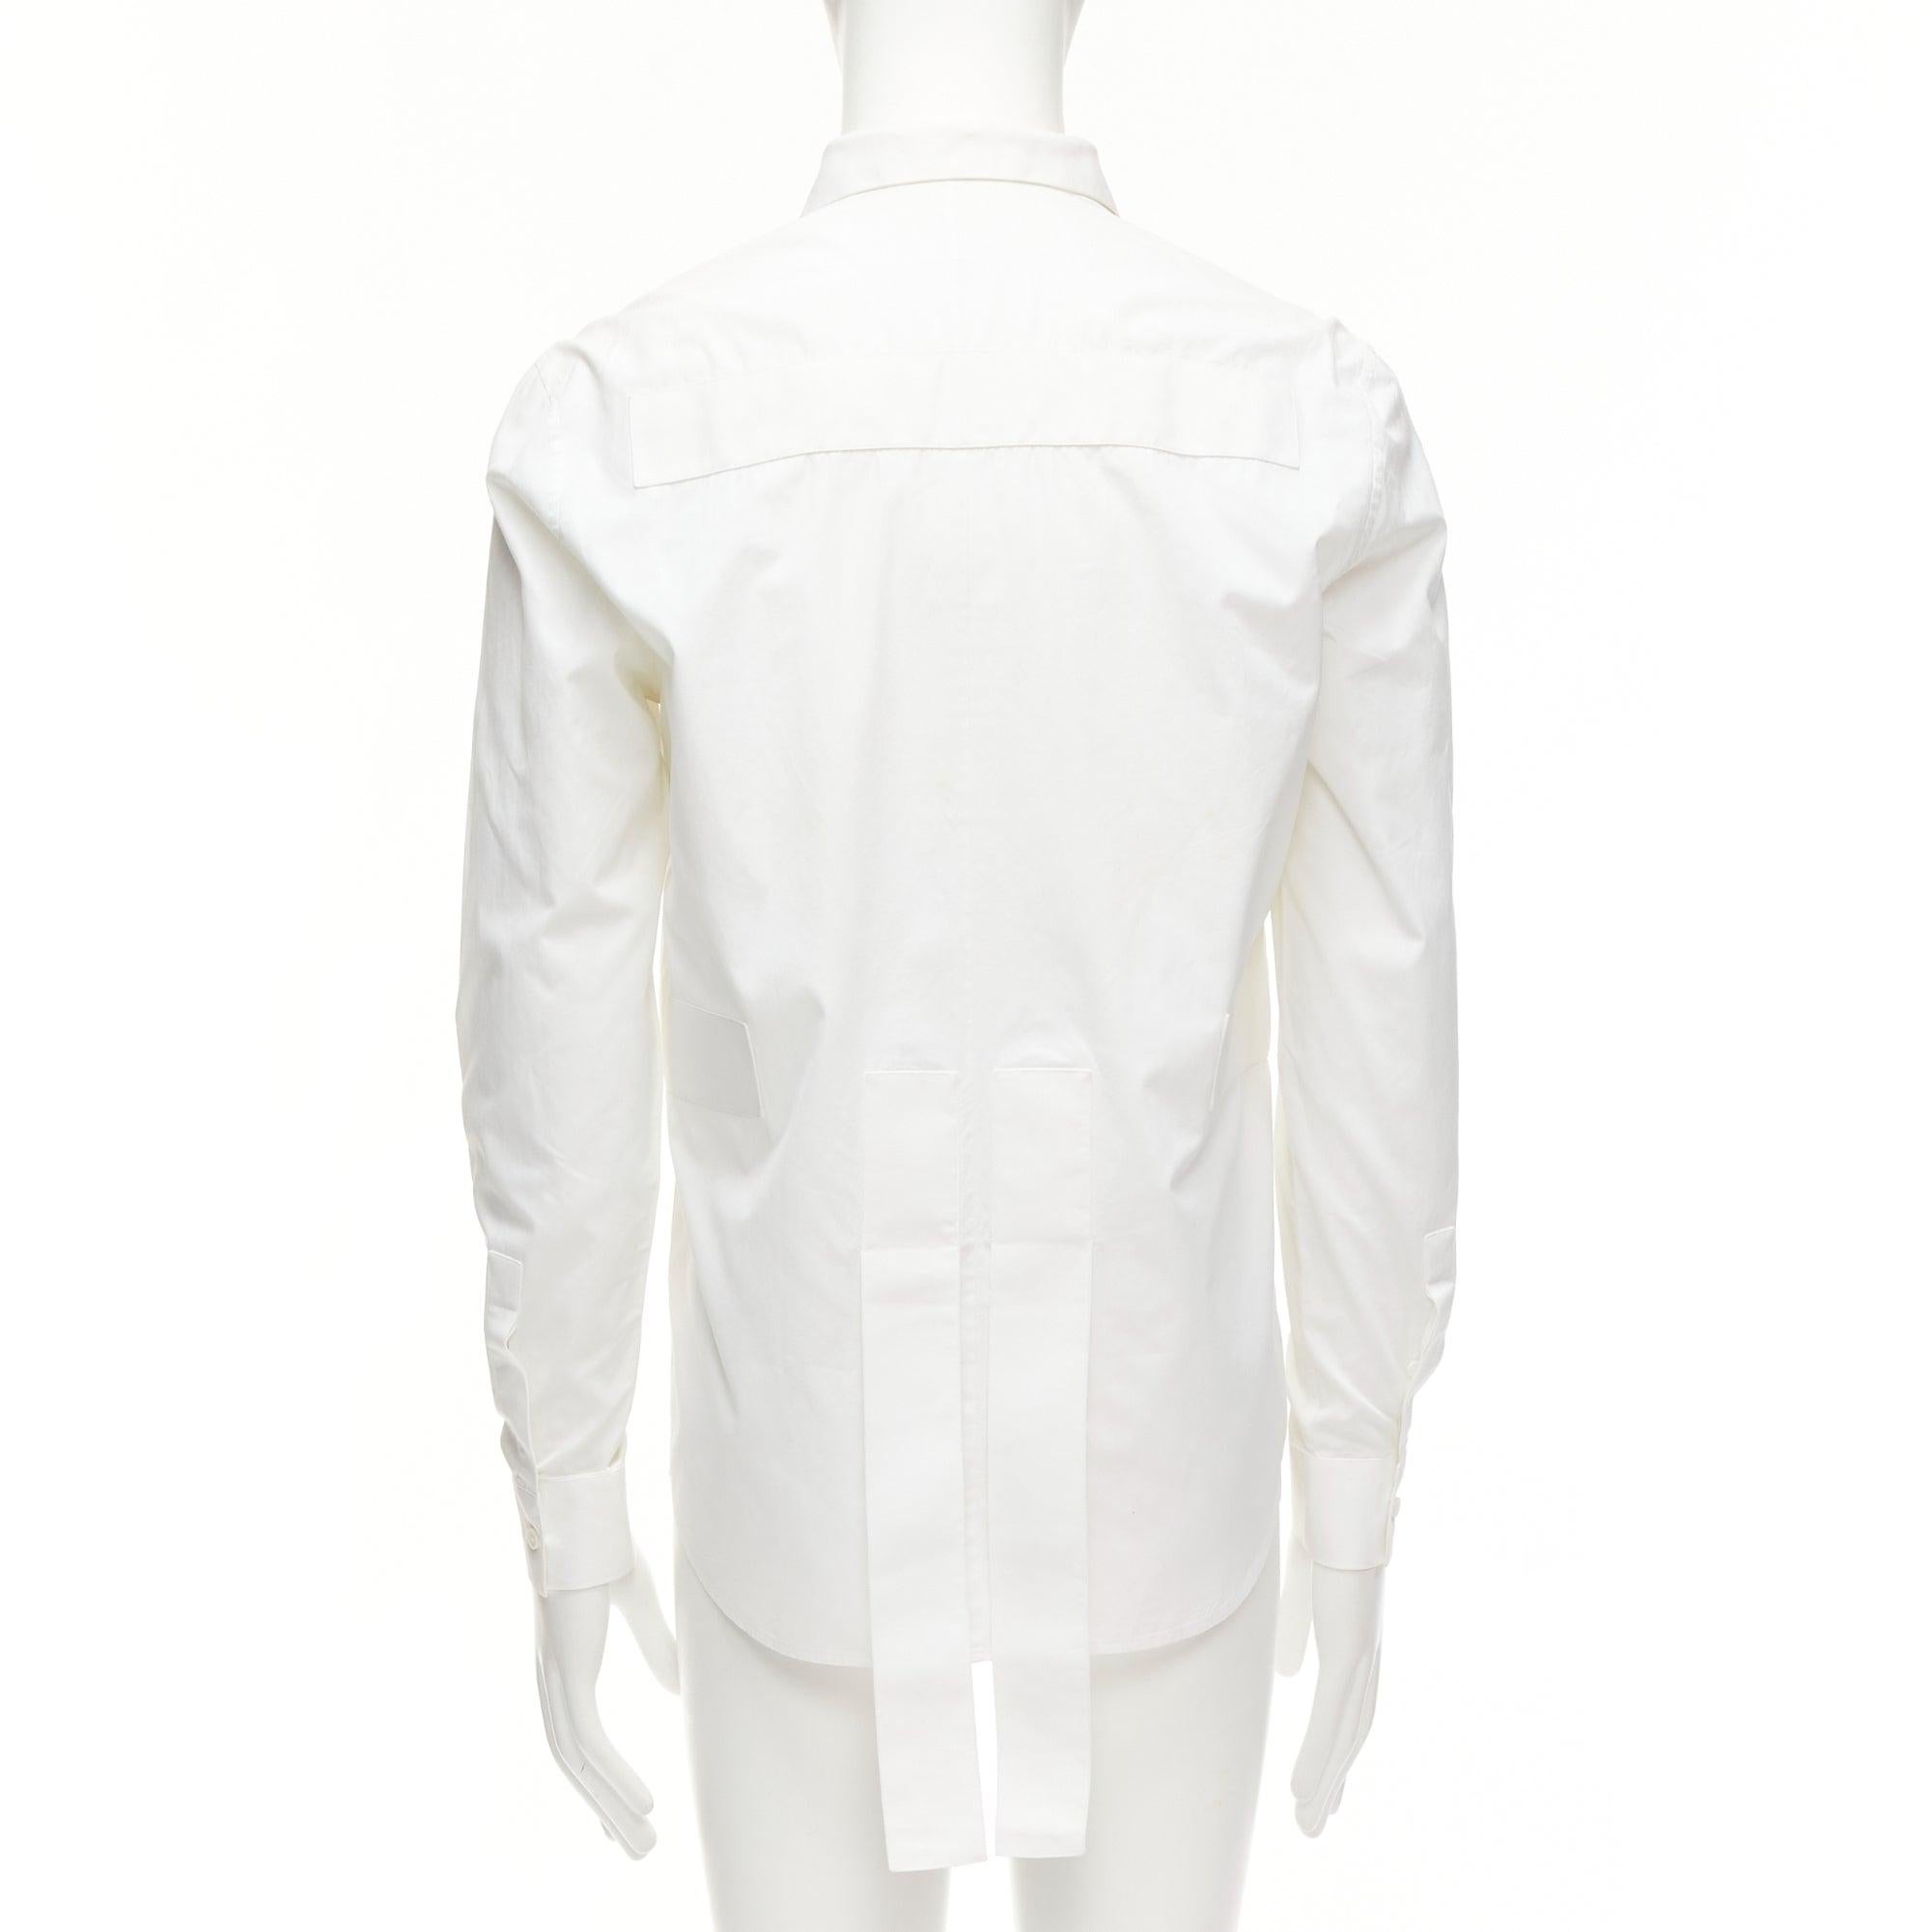 GIVENCHY Riccardo Tisci white cotton band applique shirt EU39 M
Reference: MLCO/A00013
Brand: Givenchy
Designer: Riccardo Tisci
Material: Cotton
Color: White
Pattern: Solid
Closure: Button
Lining: White Fabric
Extra Details: White lined applique at